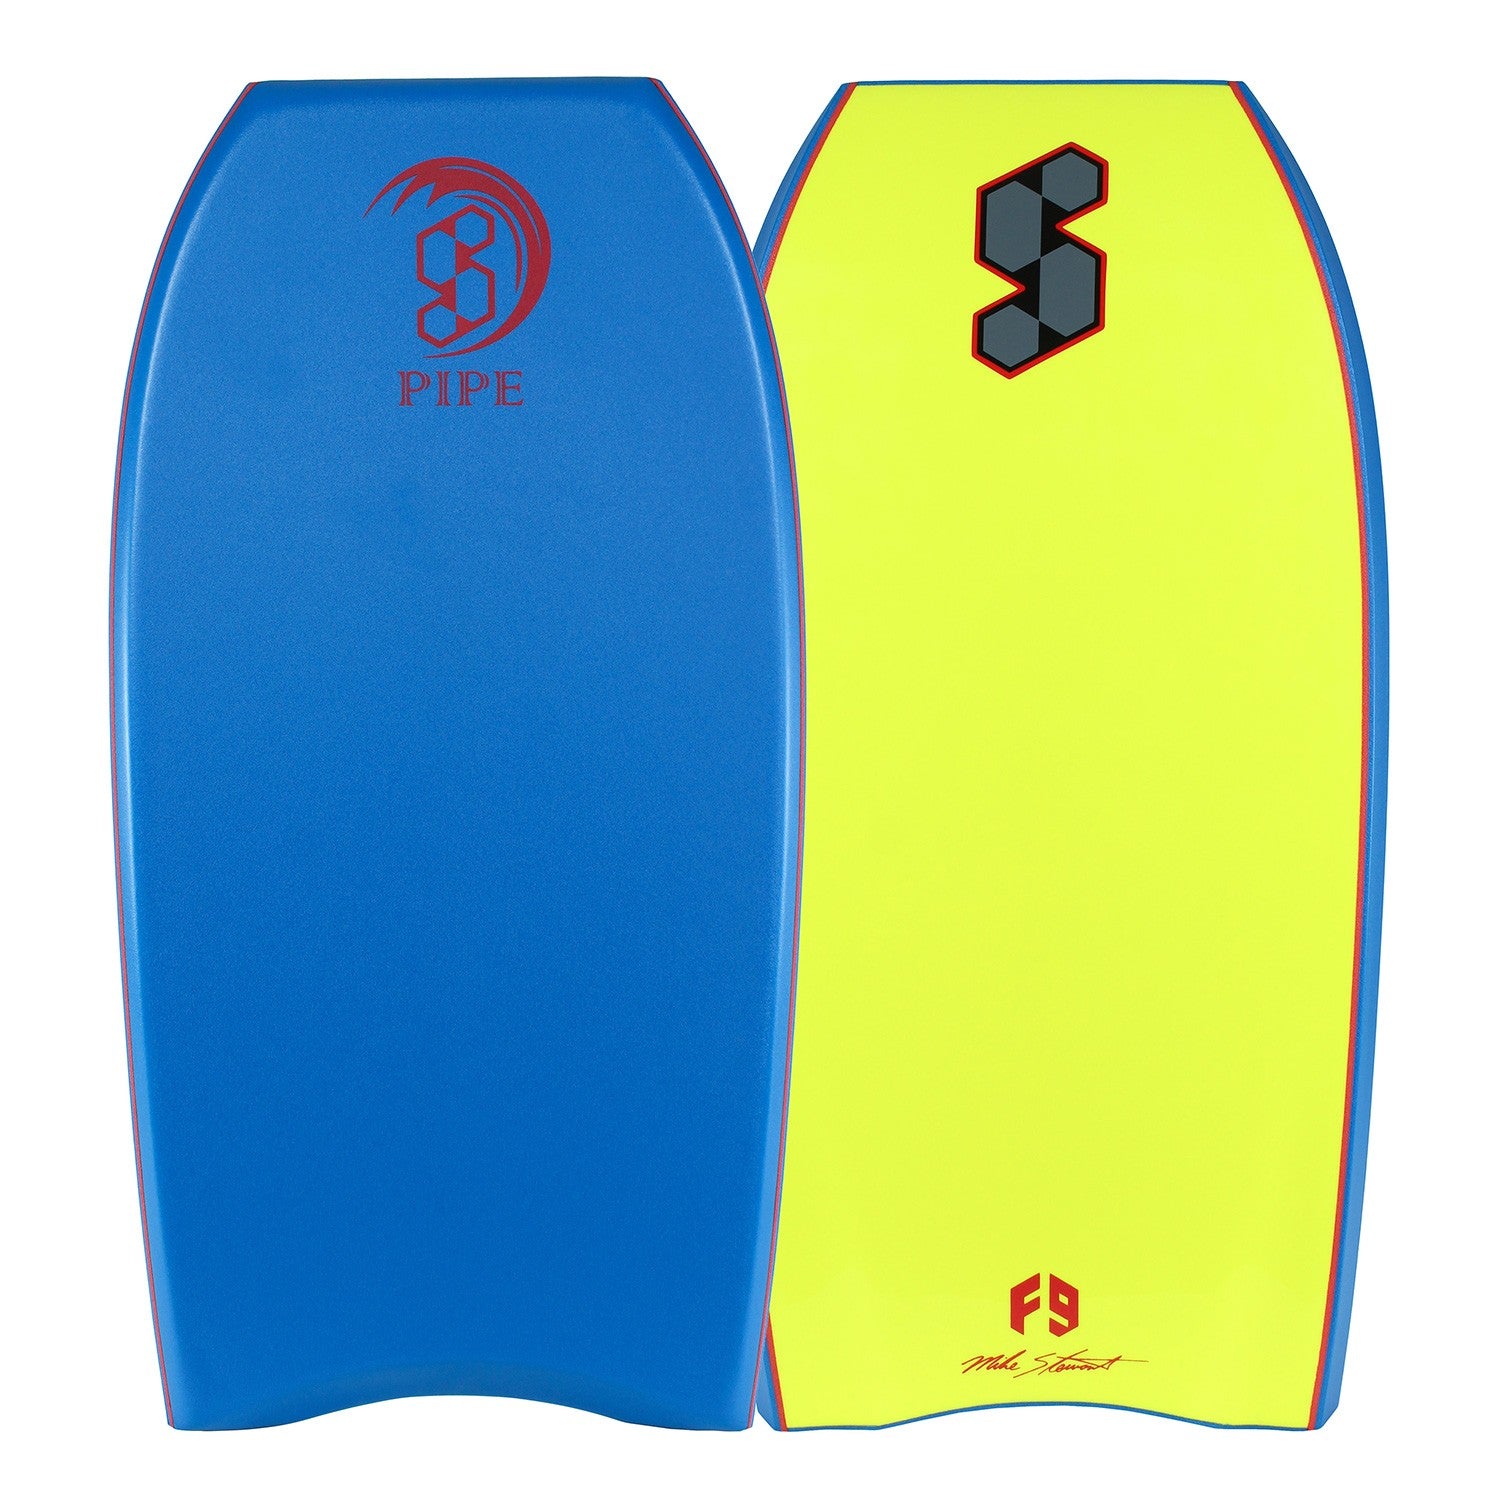 SCIENCE Bodyboard - Pipe Stringer (PE) - Royal Blue / Fuoro Yellow